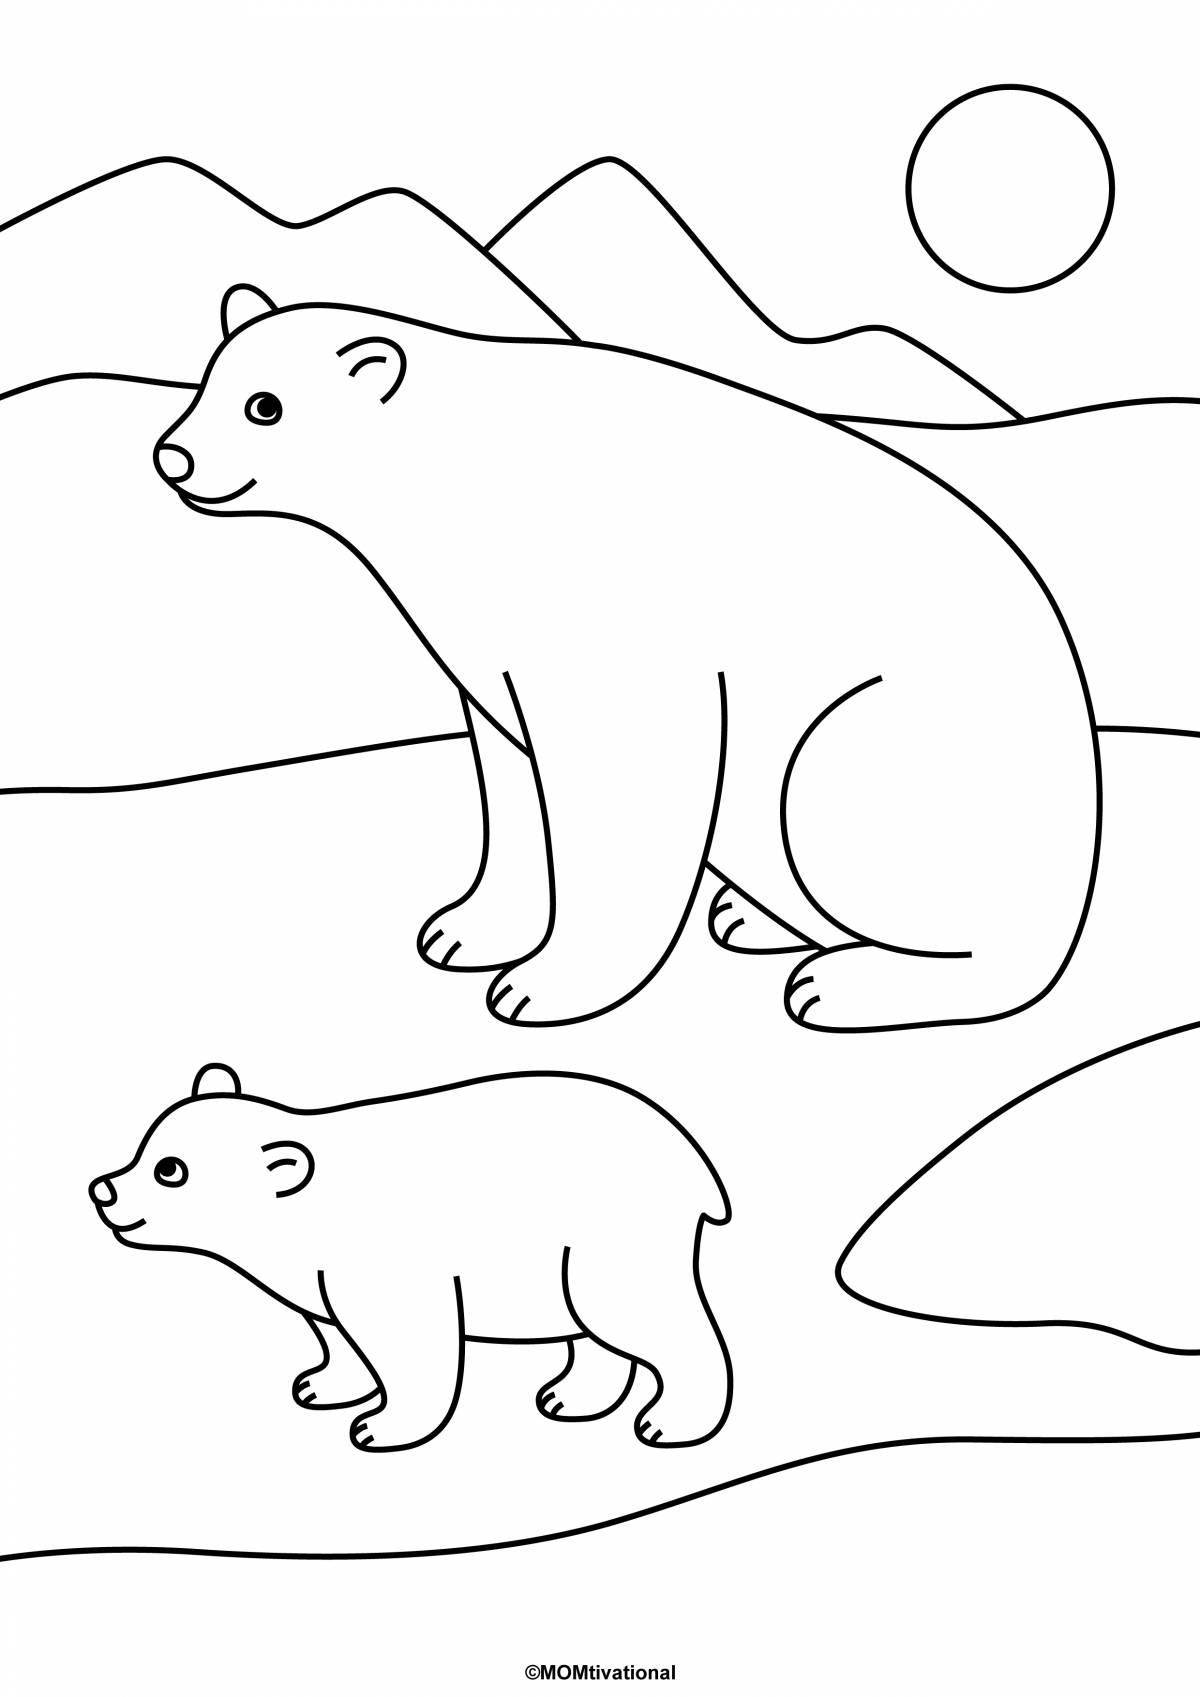 Fantastic polar bear coloring book for kids 6-7 years old